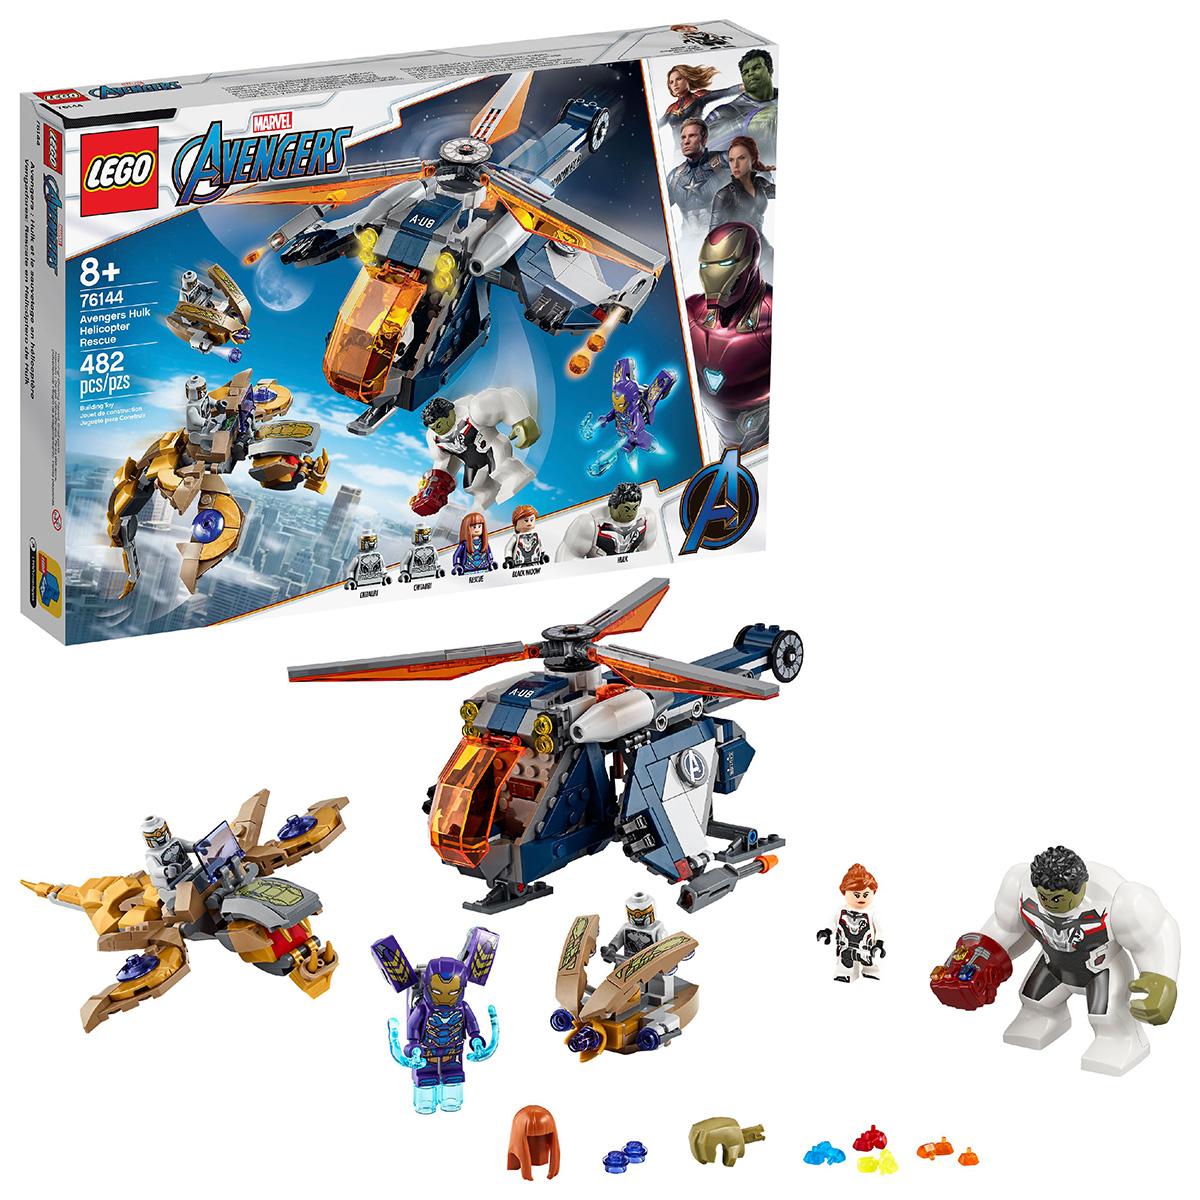 482-Piece Lego Super Heroes Avengers Hulk Helicopter Rescue for $42.95 Shipped